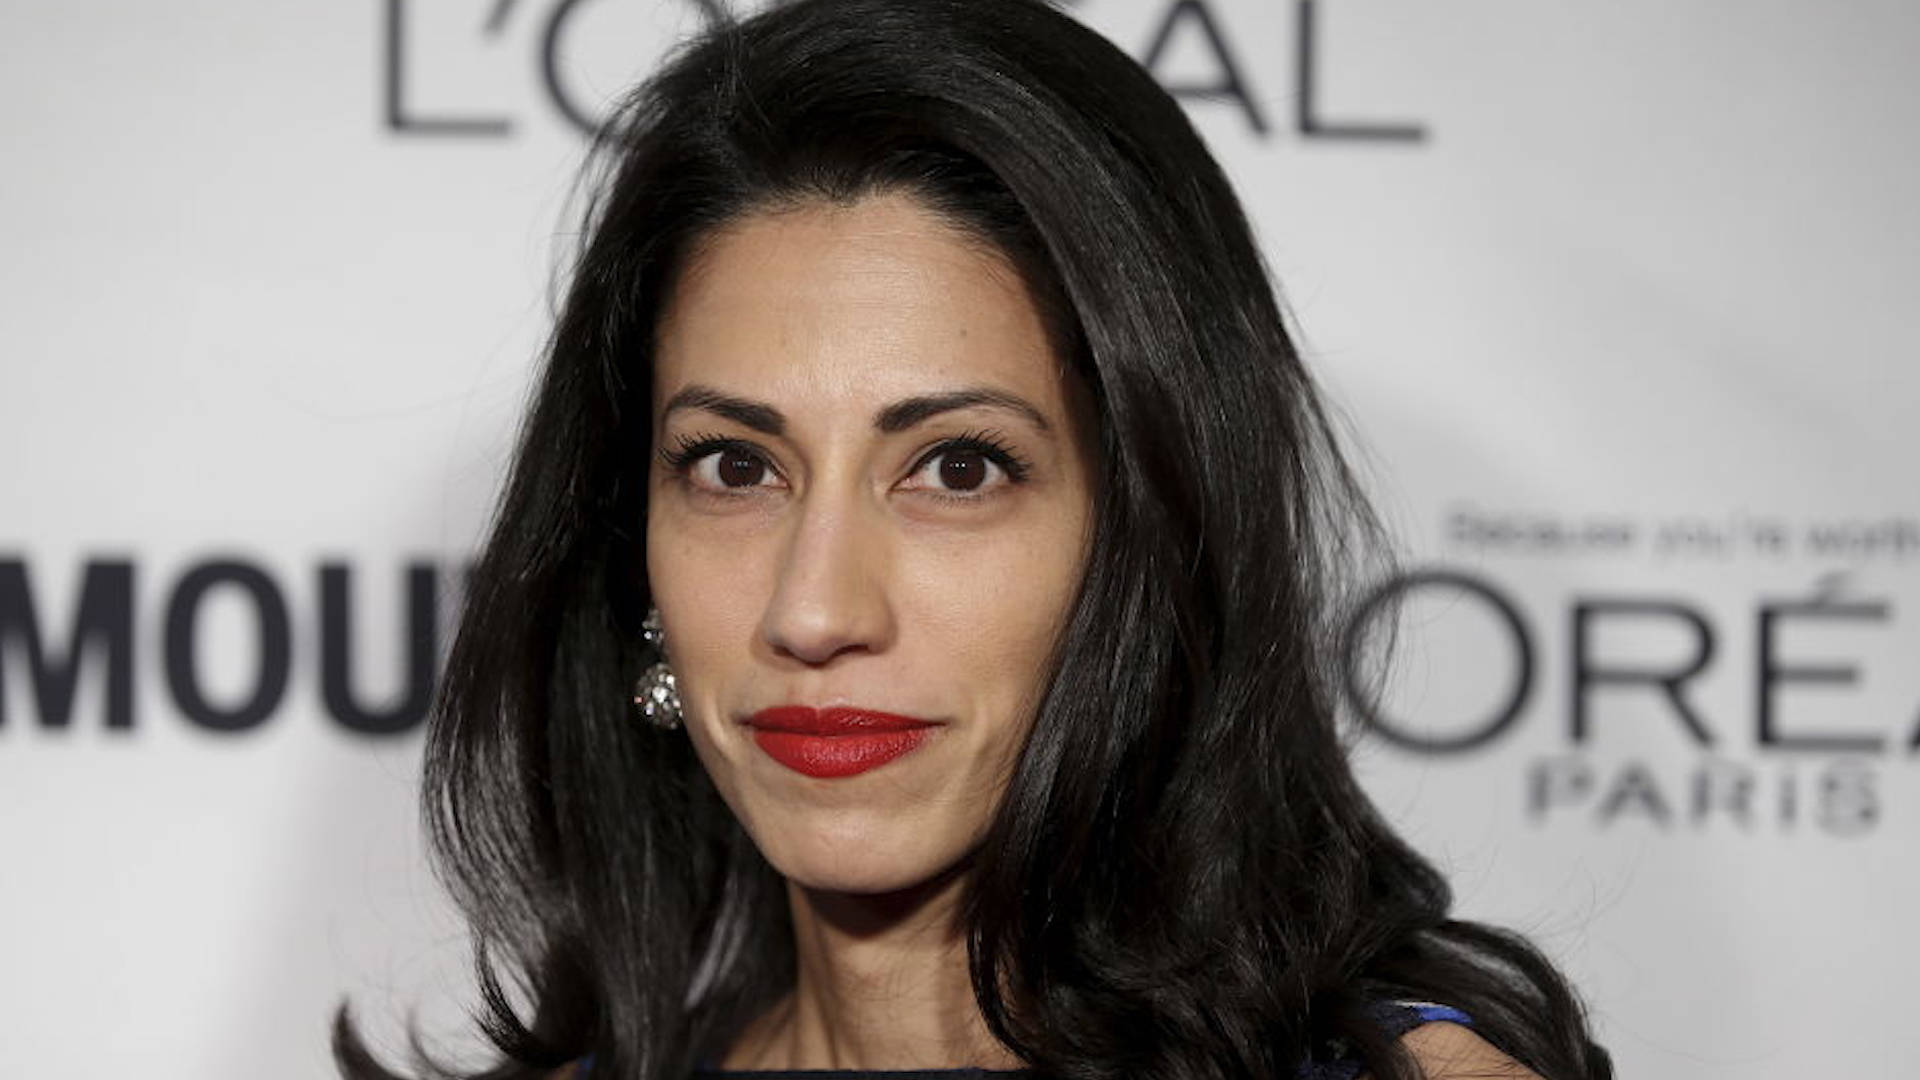 Trump Calls Justice Department “Deep State,” Wants Huma Abedin Jailed | Democracy Now!